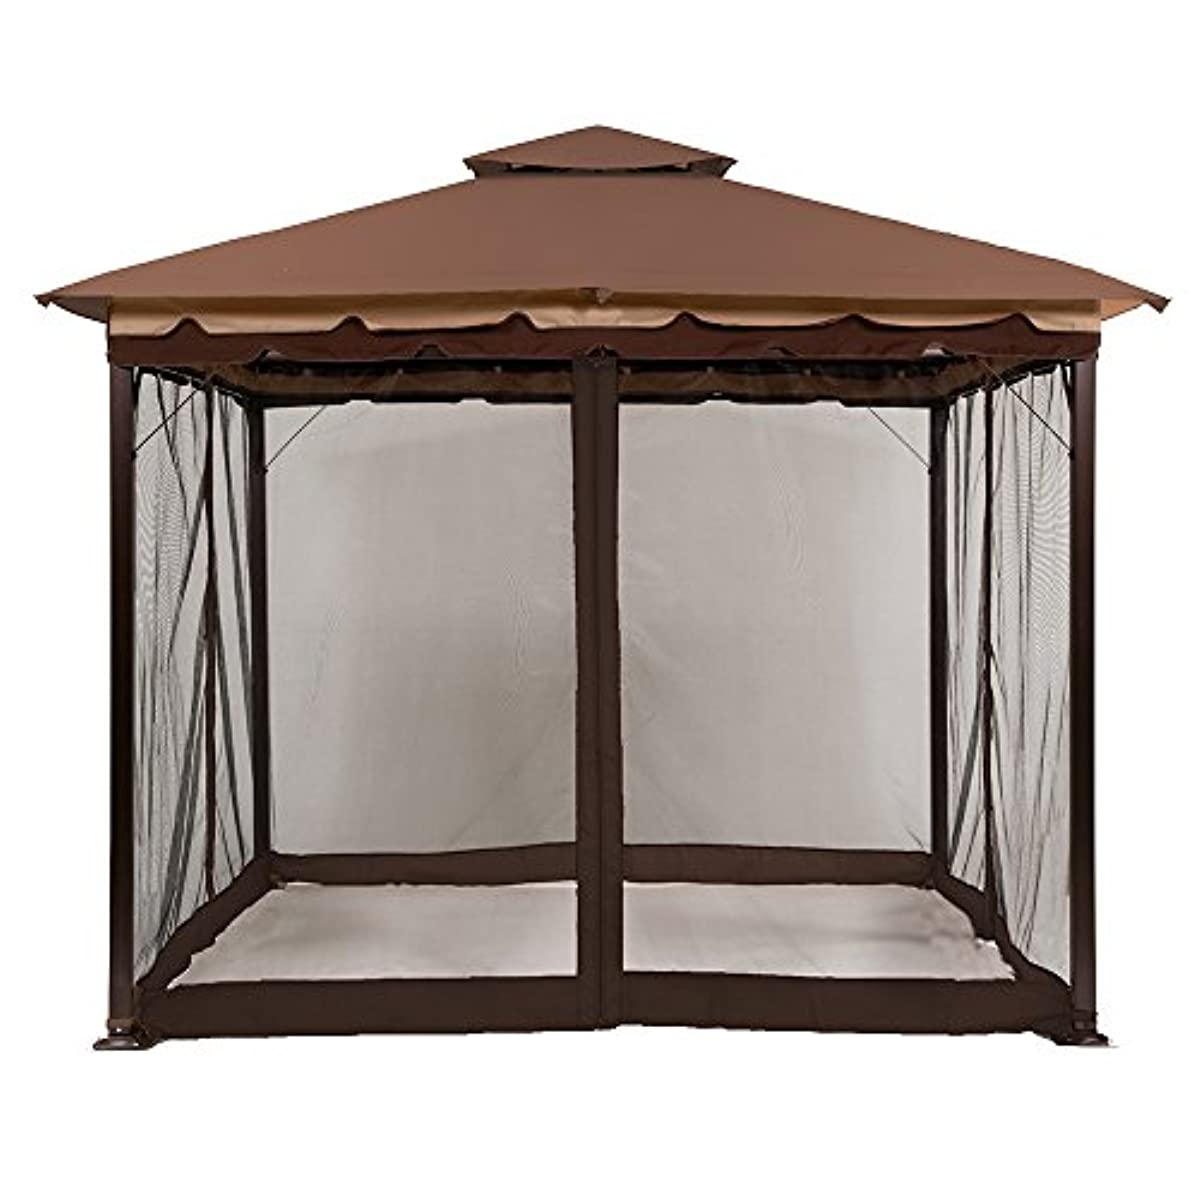 Sunjoy Fabric Replacement Mosquito Netting only, fits 10 x 12 Gazebos ...